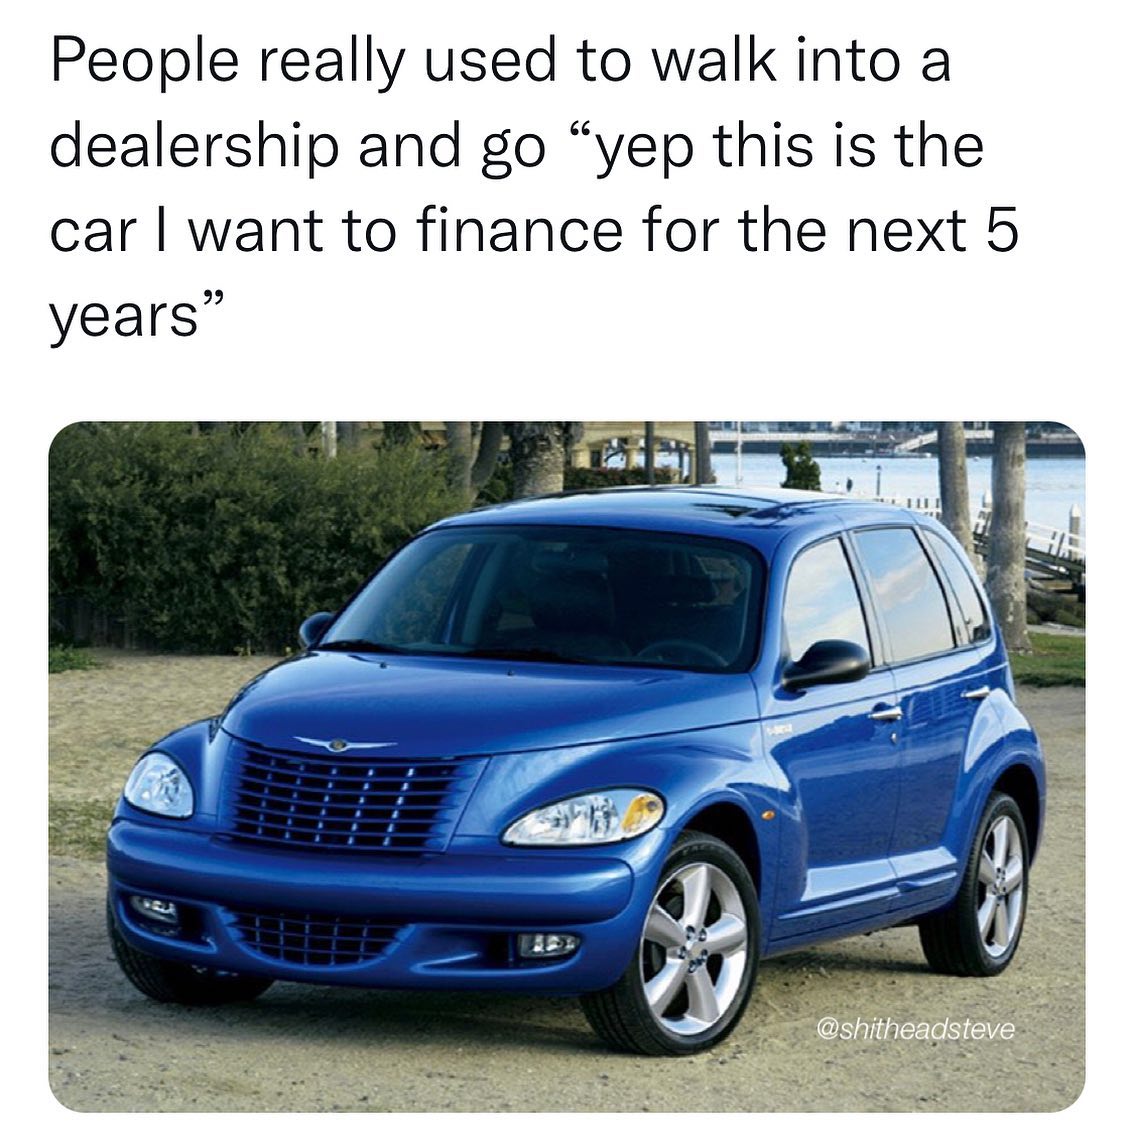 funny pics and randoms - chrysler pt cruiser - People really used to walk into a dealership and go "yep this is the car I want to finance for the next 5 years" Fit 3